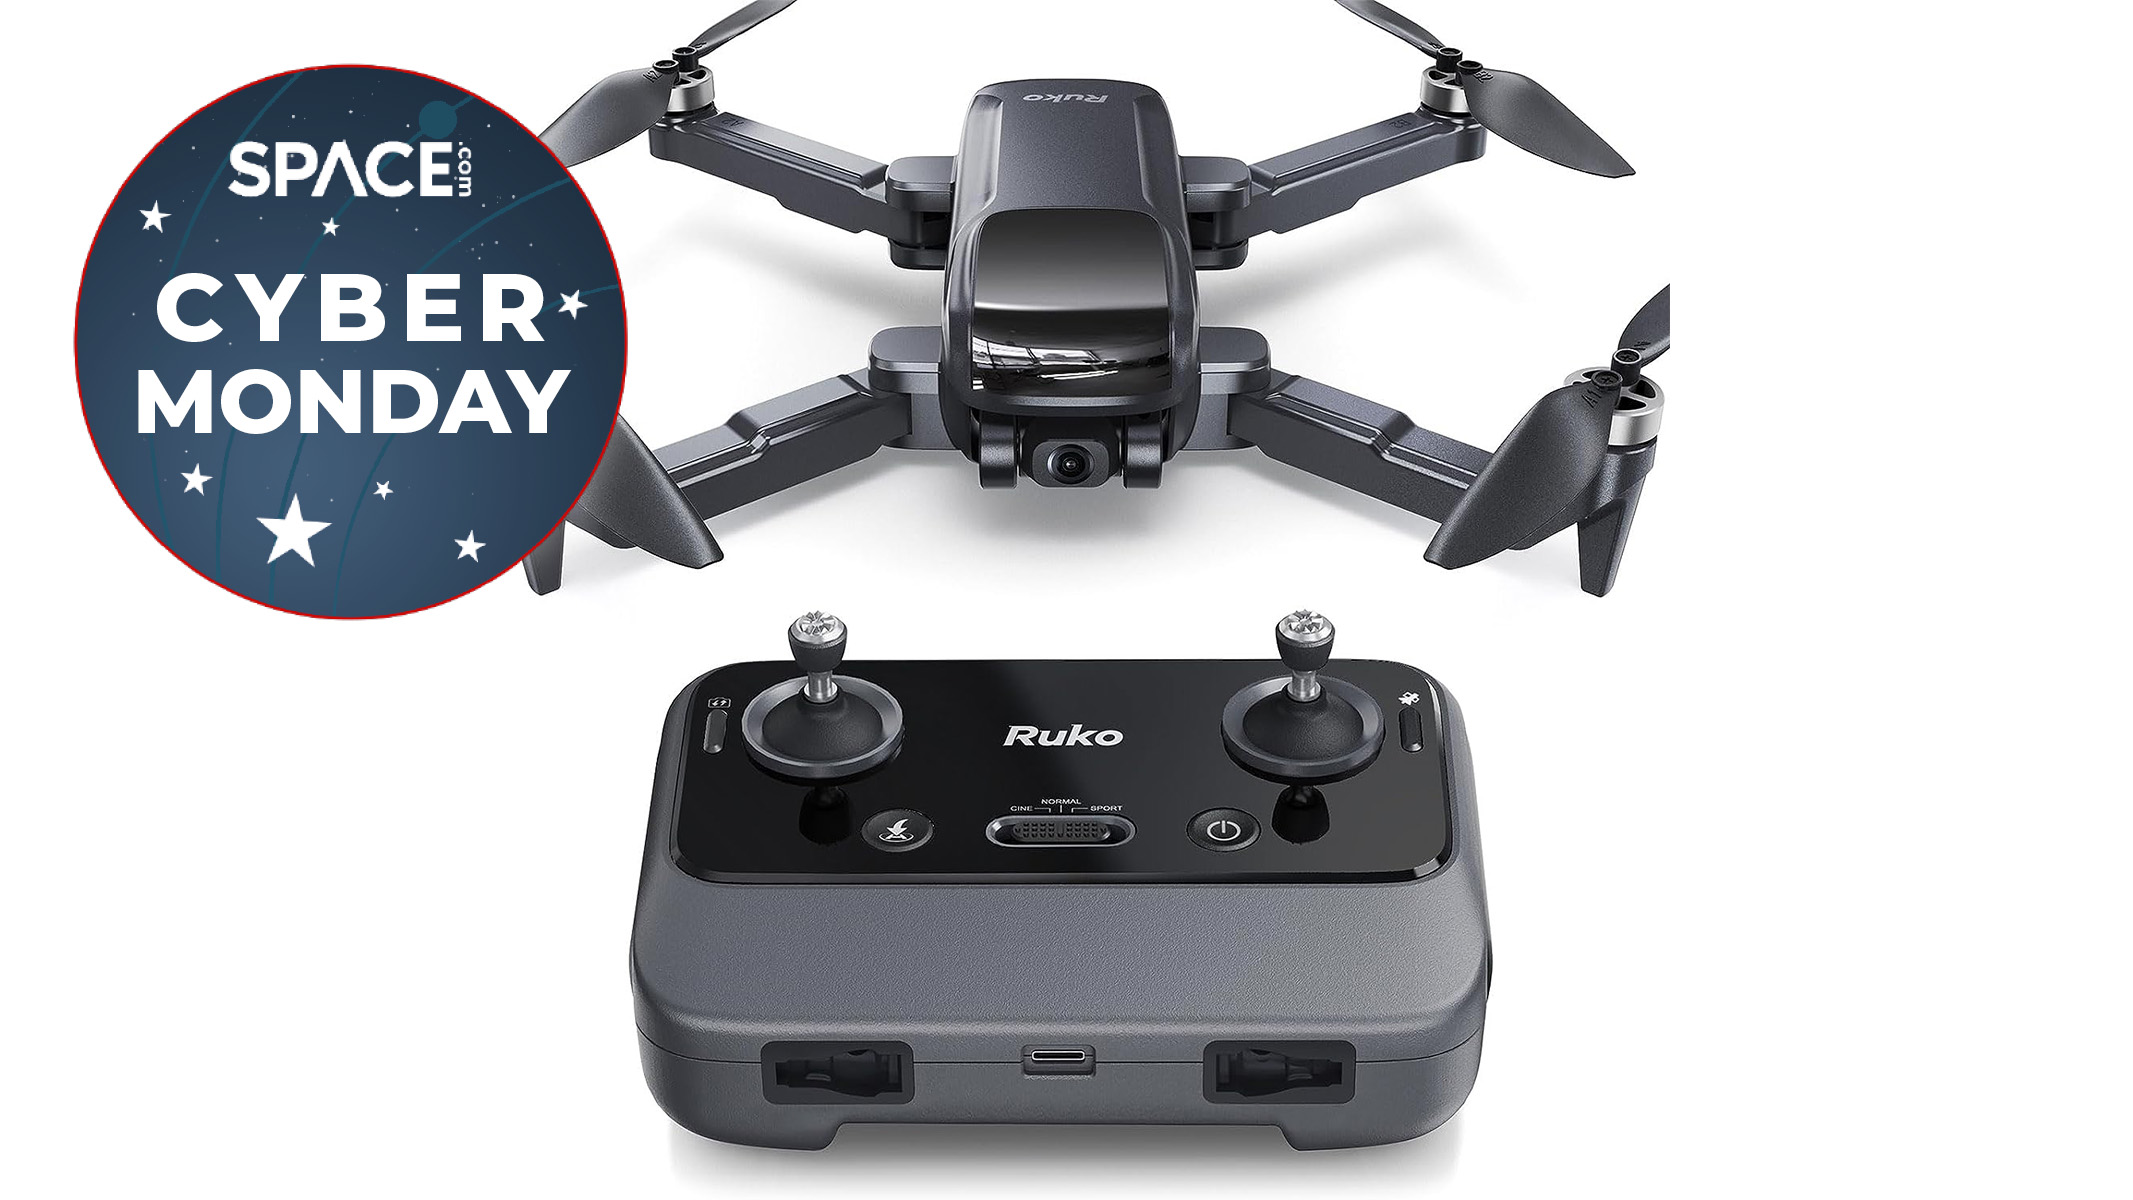 Black Falcon Drone Reviews - Cheap 4K Flying Drone or Really Worth Buying?